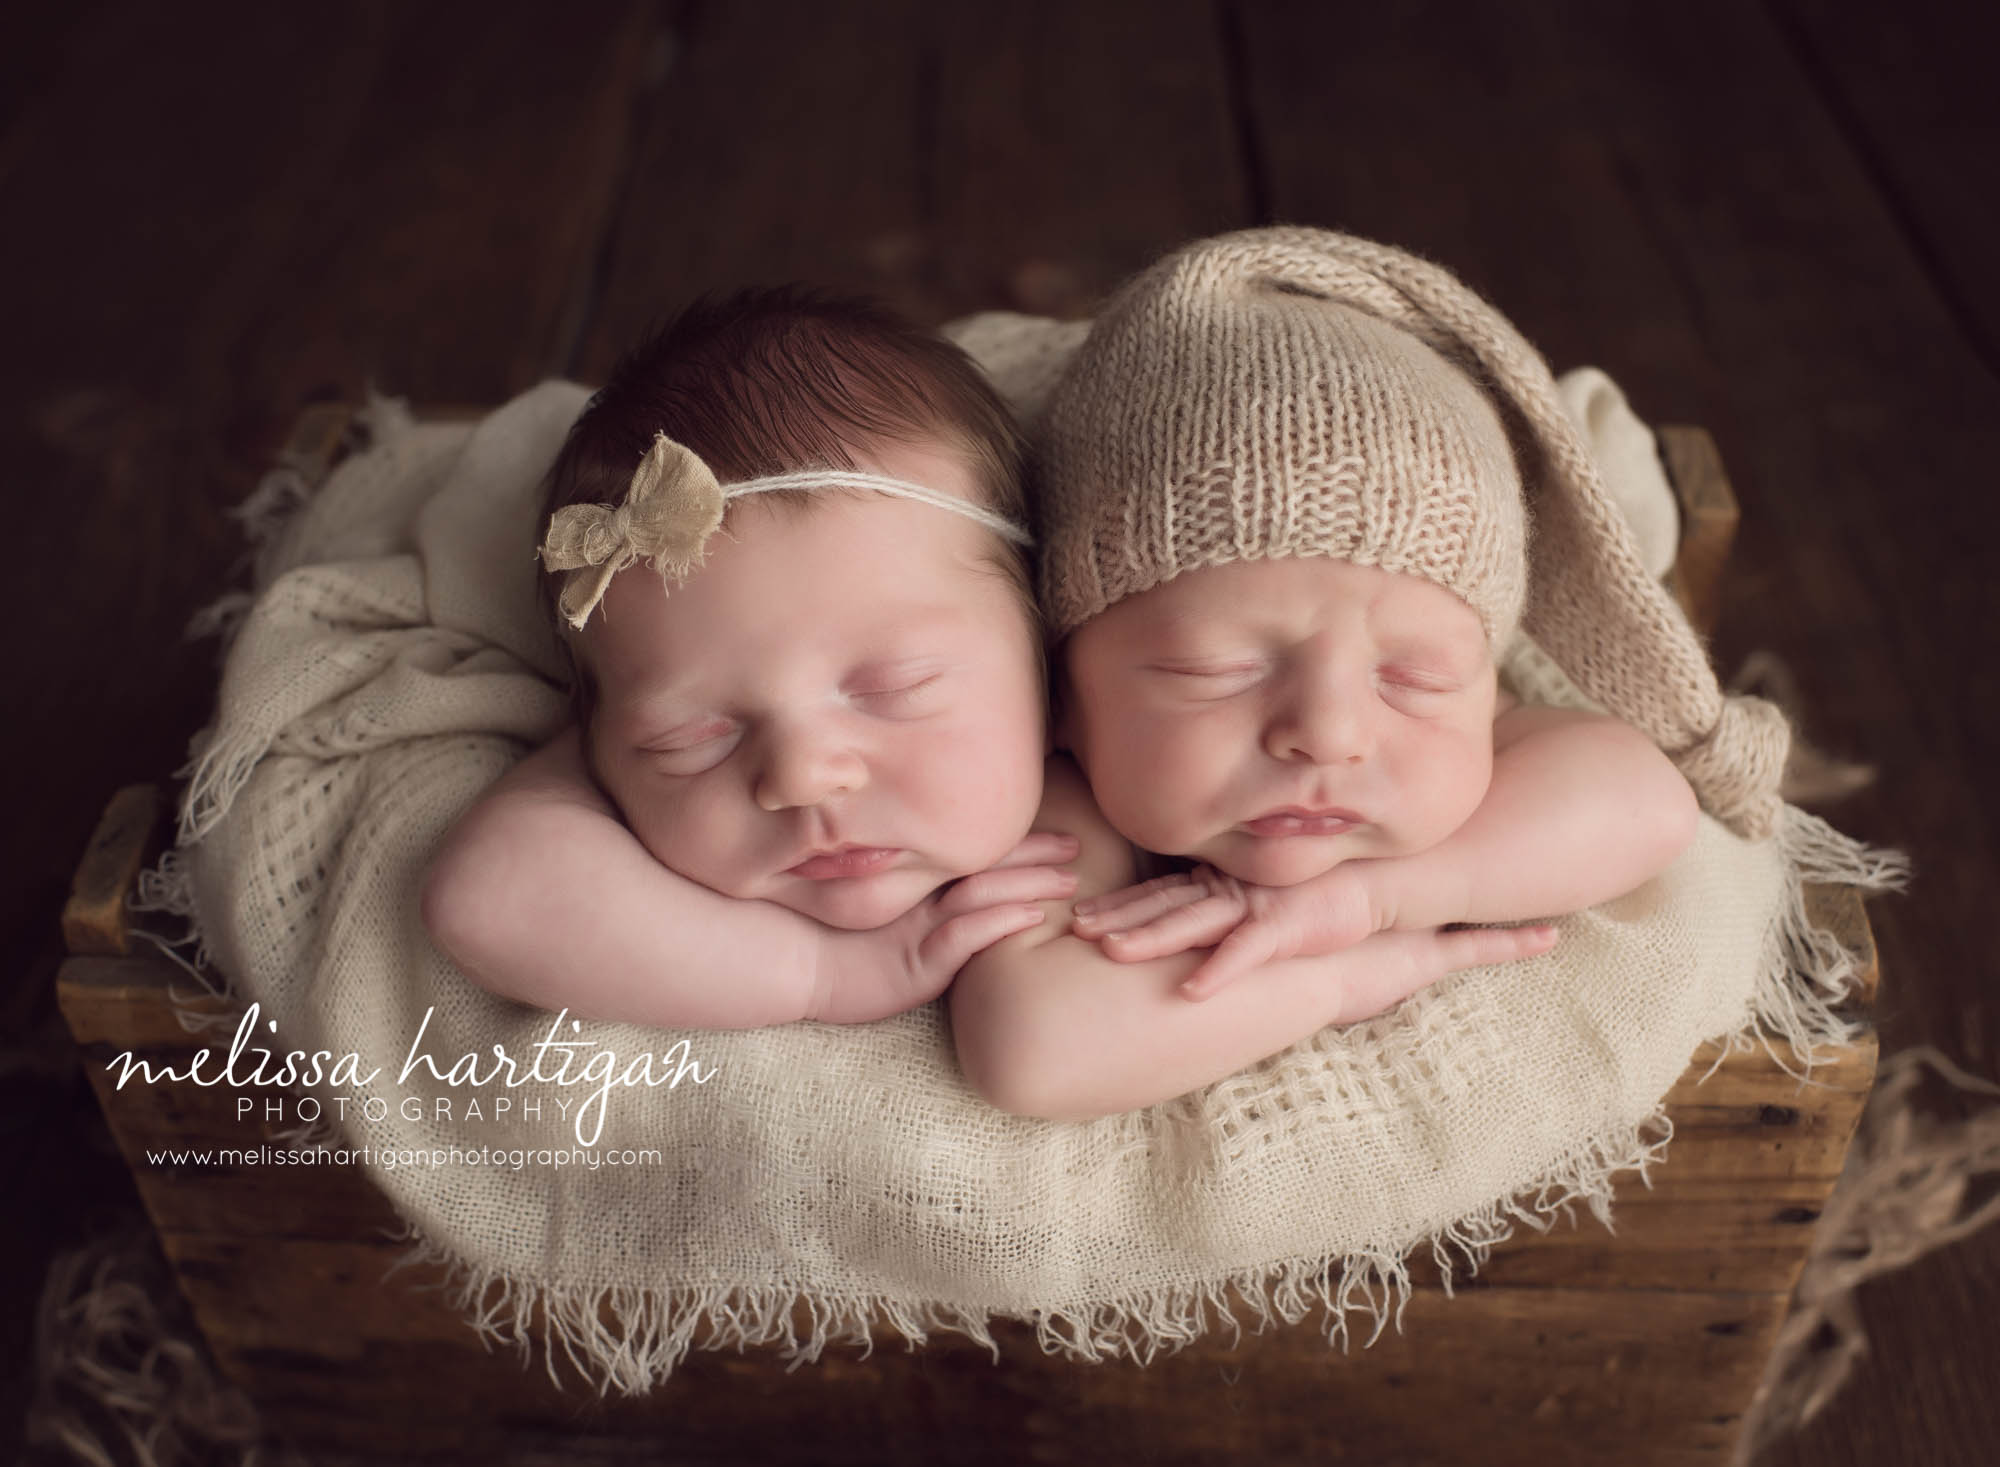 Melissa Hartigan Photography Connecticut Newborn twin Photographer Coventry Ct Middlefield CT baby Fairfield county Newborn and maternity CT photographer Newborn twin photographer baby twins sleeping in wooden box with cream blanket wearing headband and knit hat